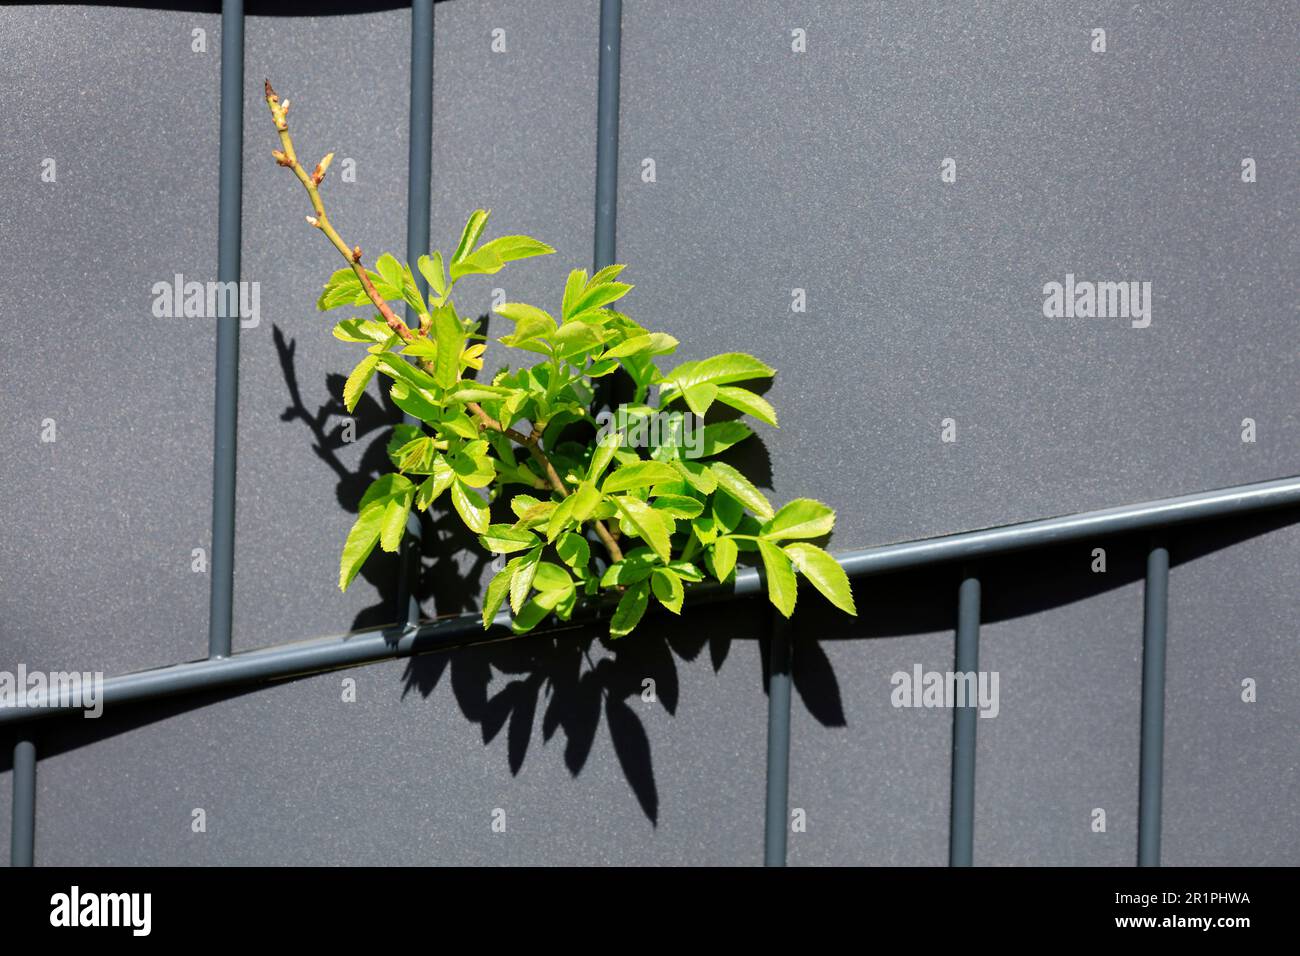 Leaves, buds, metal fence, botany, texture, background, detail, still life, Bad Kissingen, Germany, Stock Photo